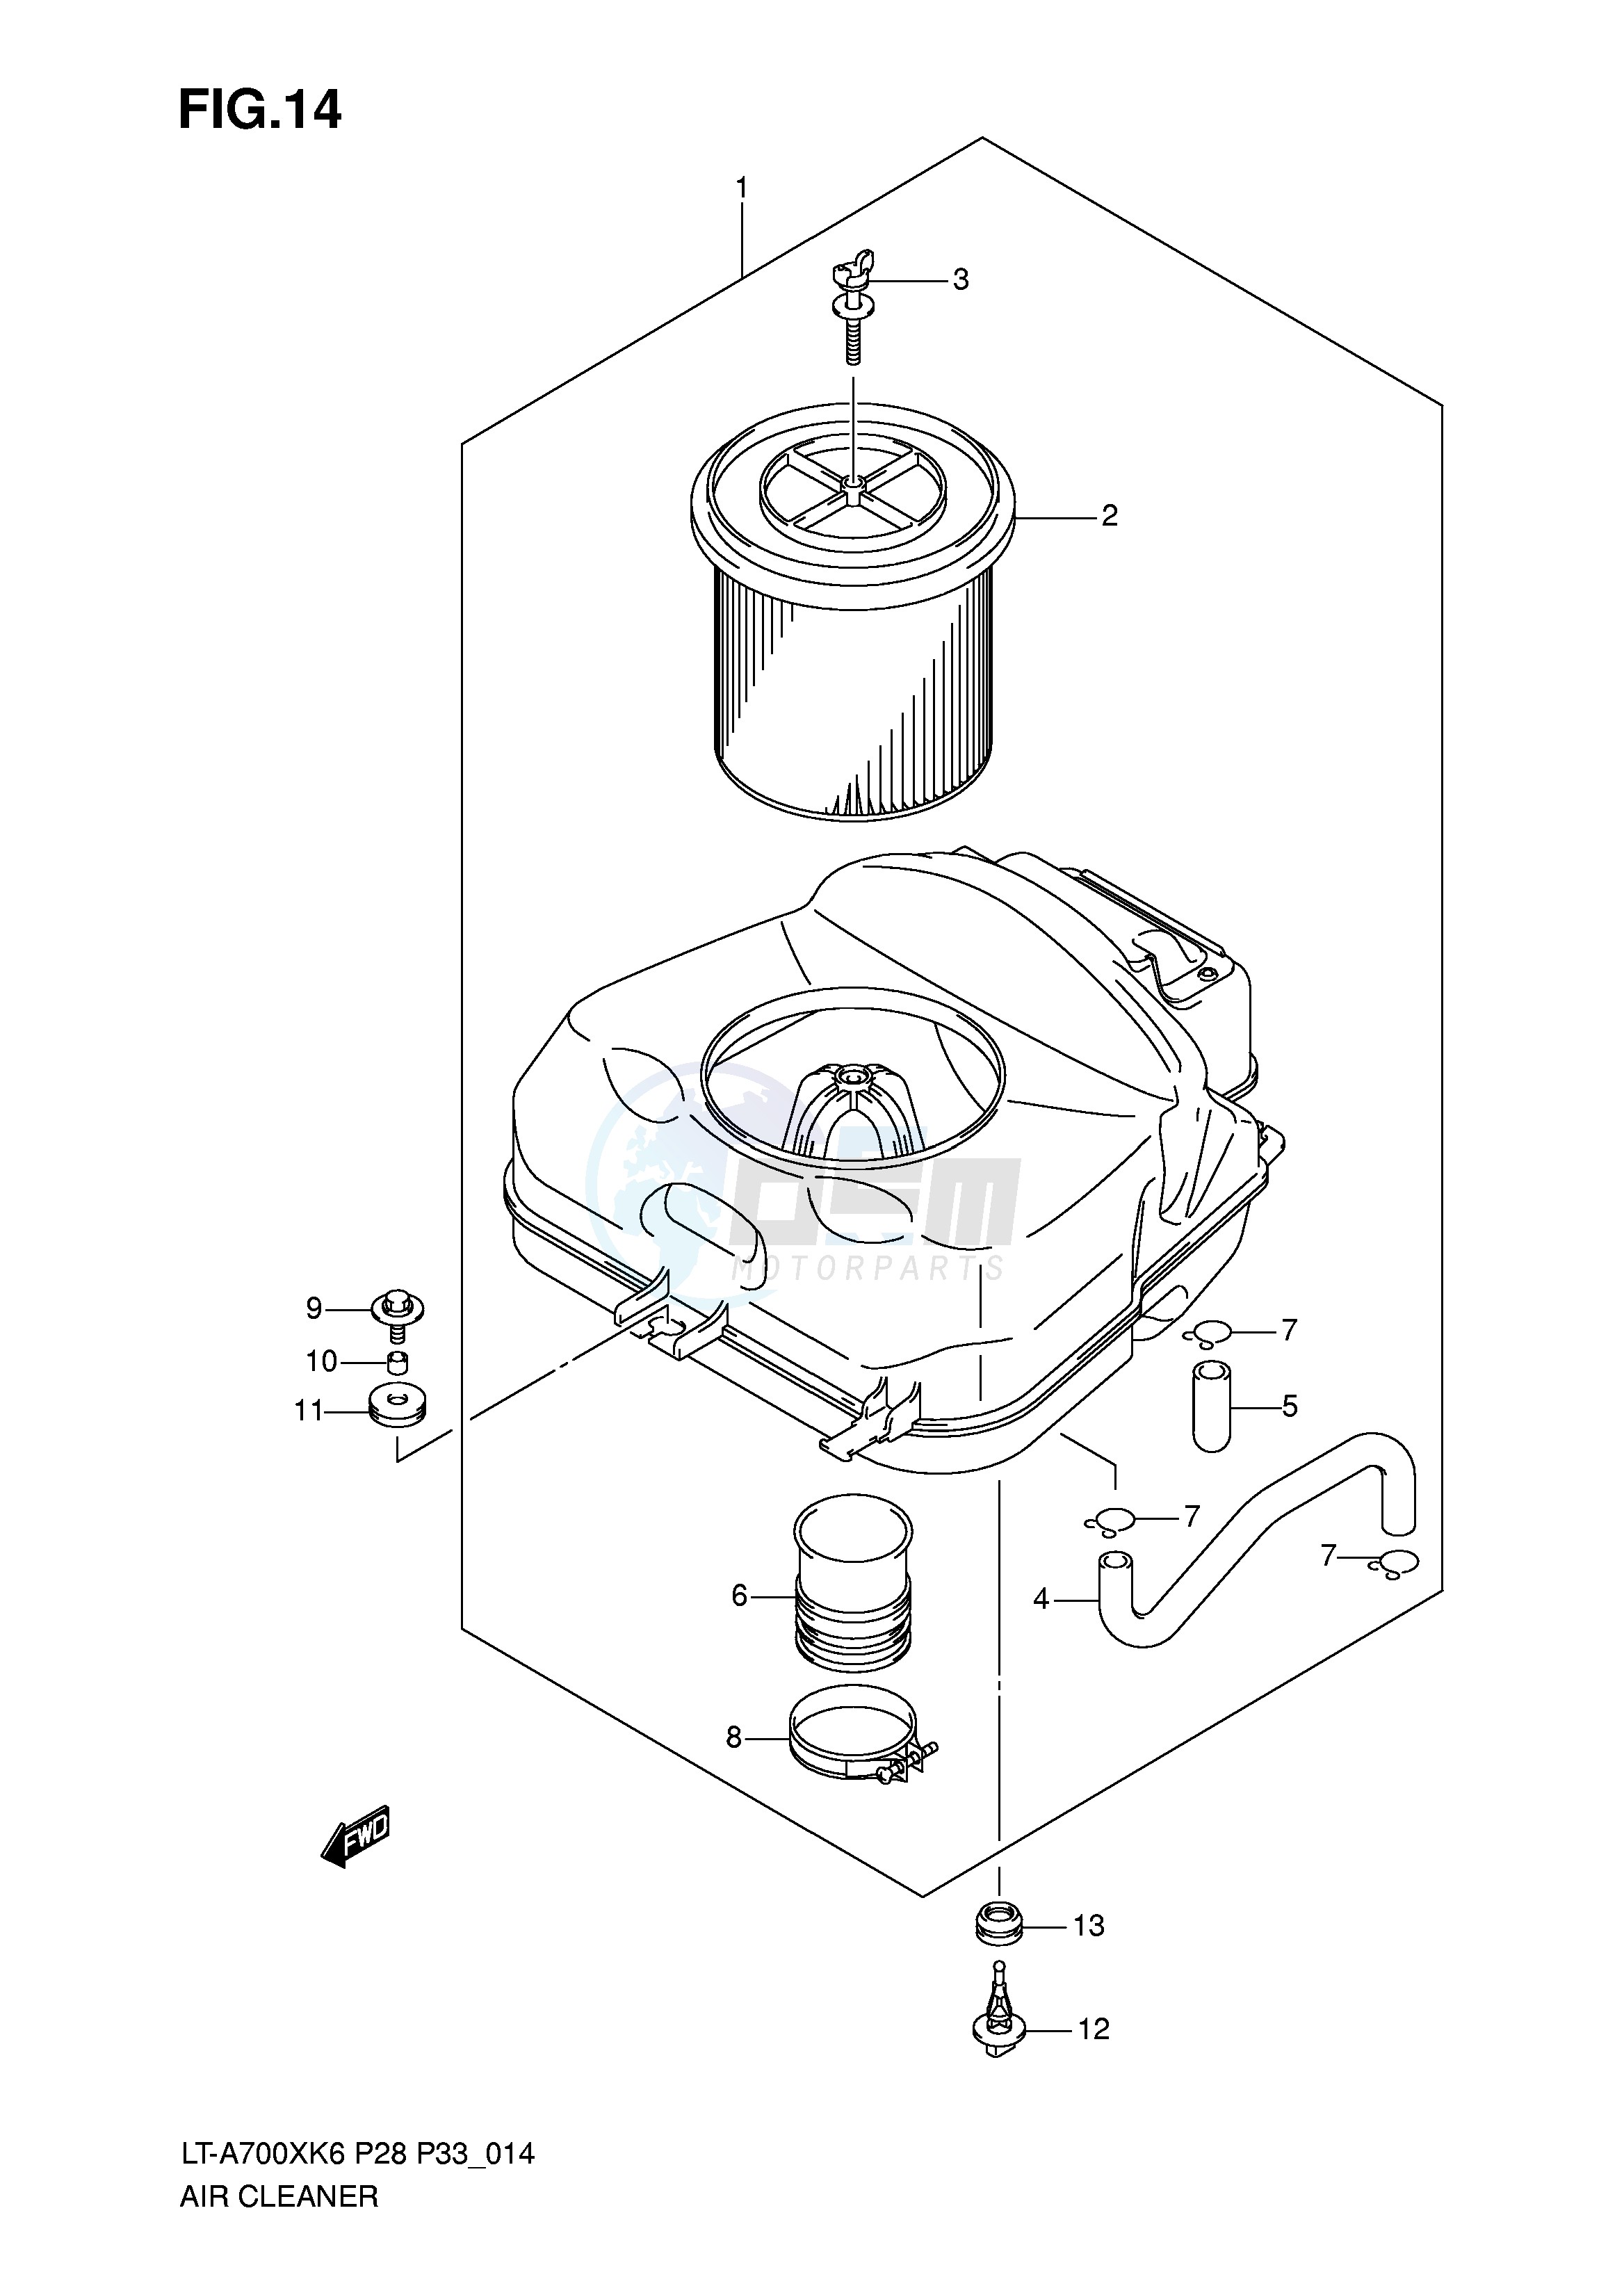 AIR CLEANER image